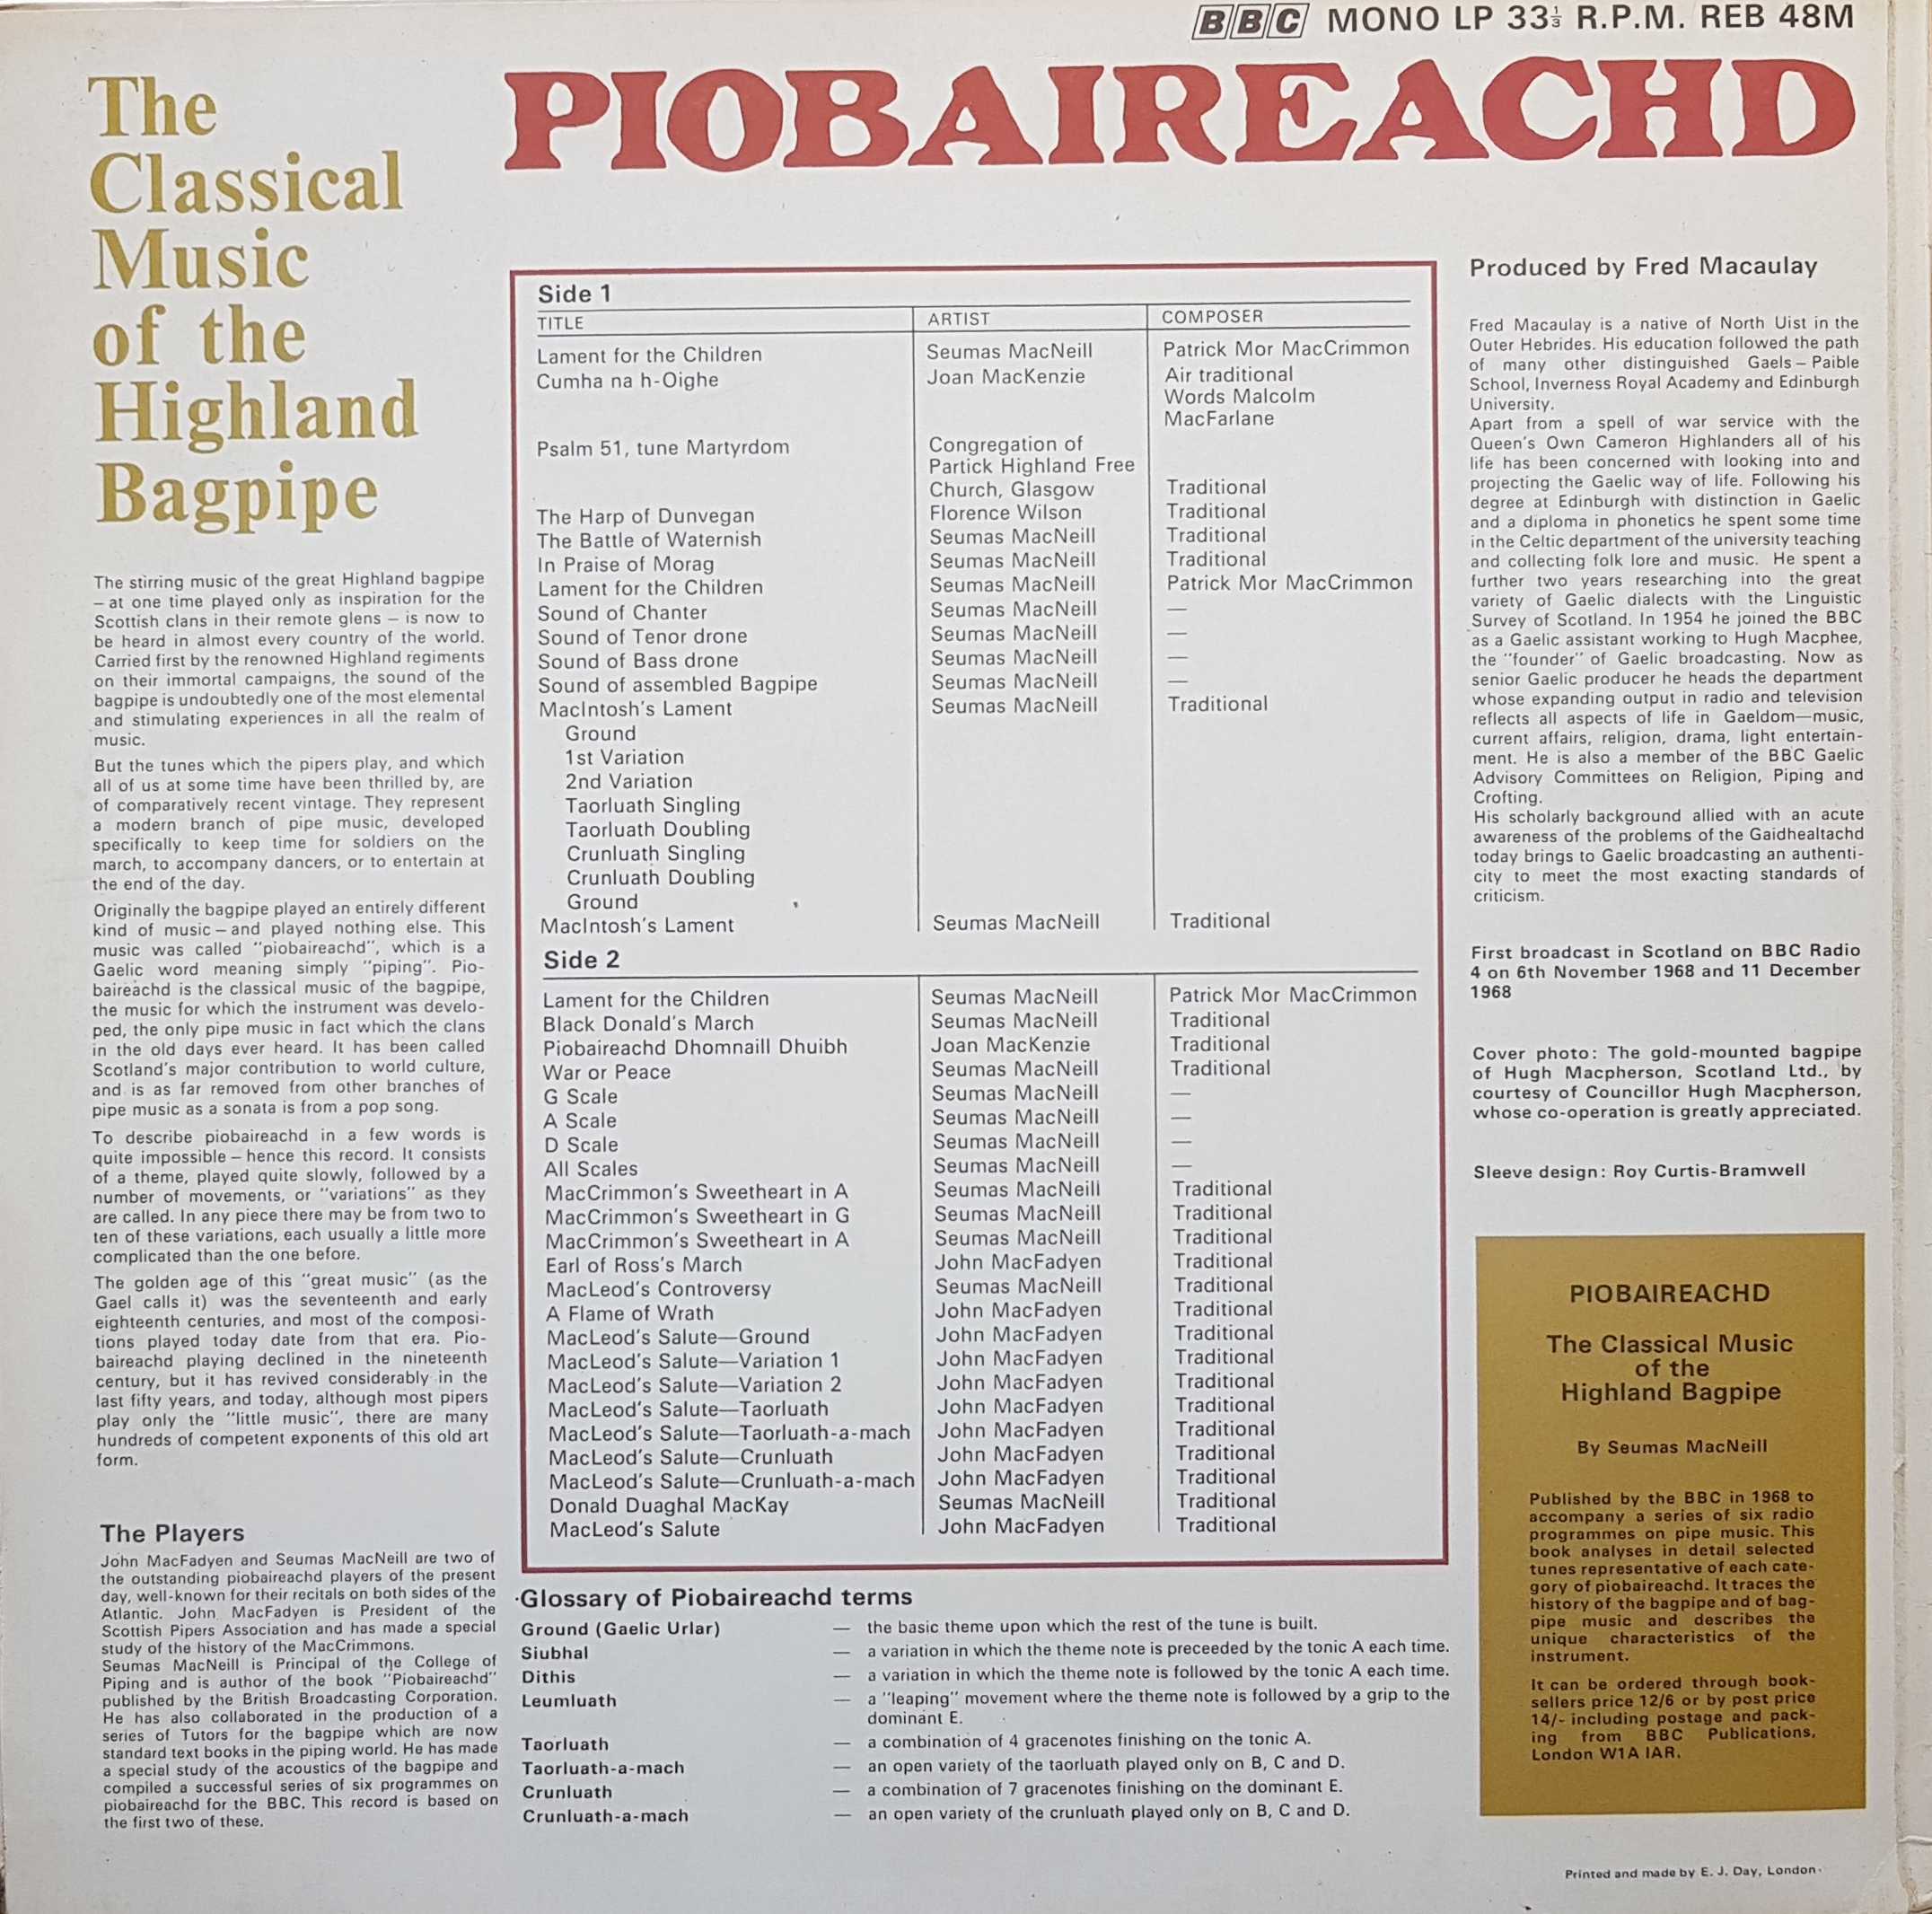 Picture of REB 48 Piobaireachd: The Classical Music Of the Highland Bagpipe by artist Various from the BBC records and Tapes library